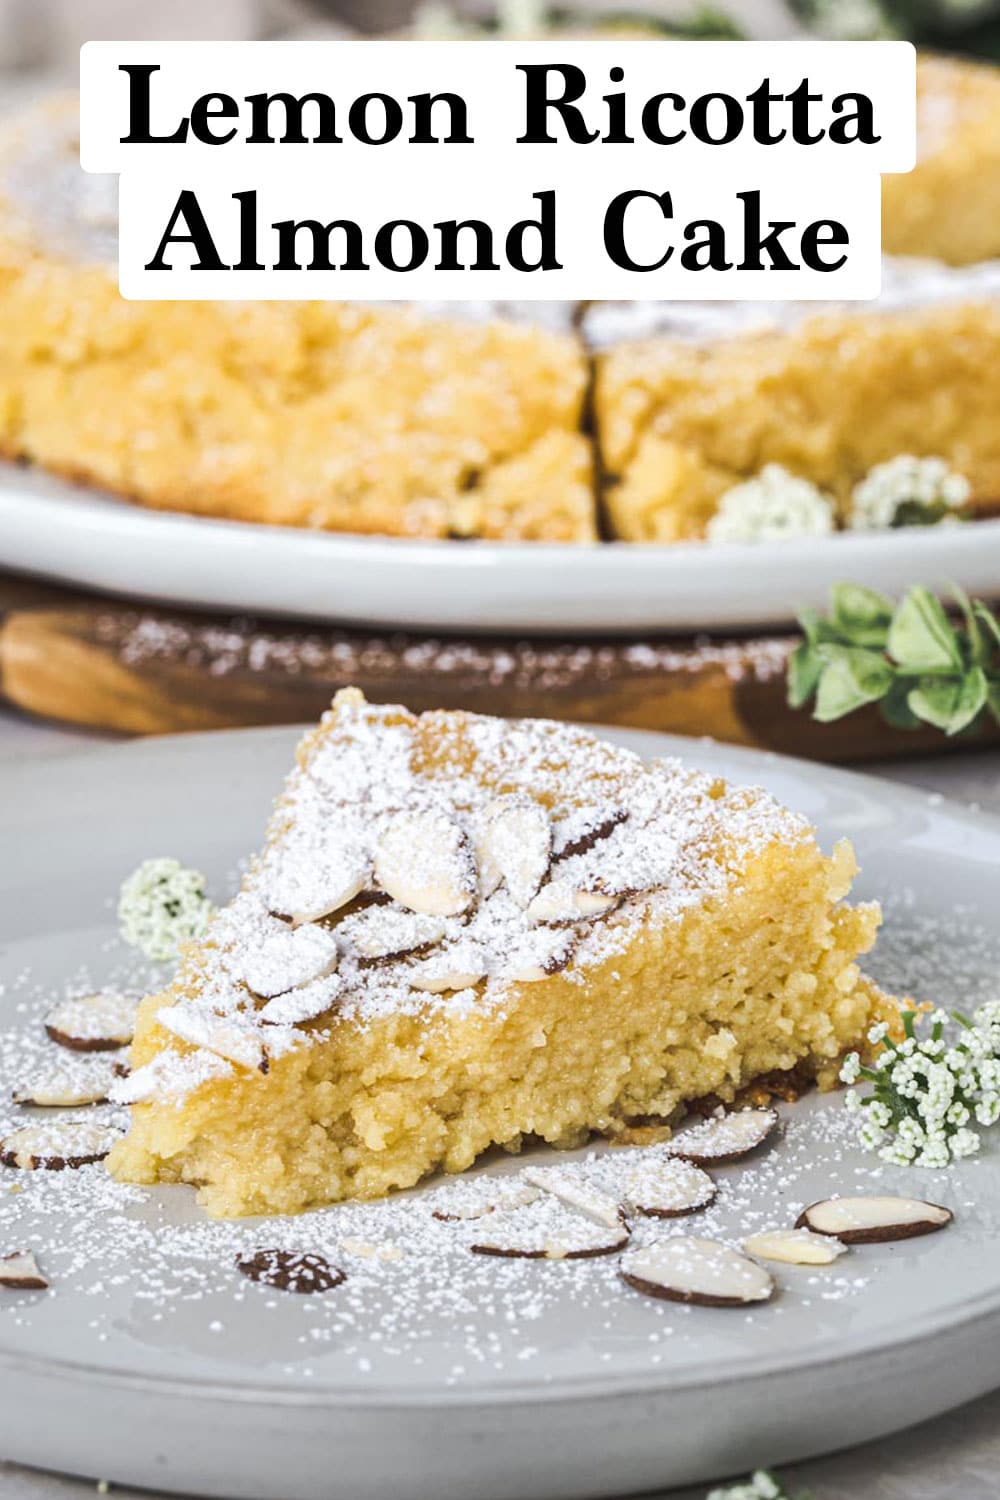 Slice of lemon ricotta almond cake dusted with powdered sugar on a white plate.